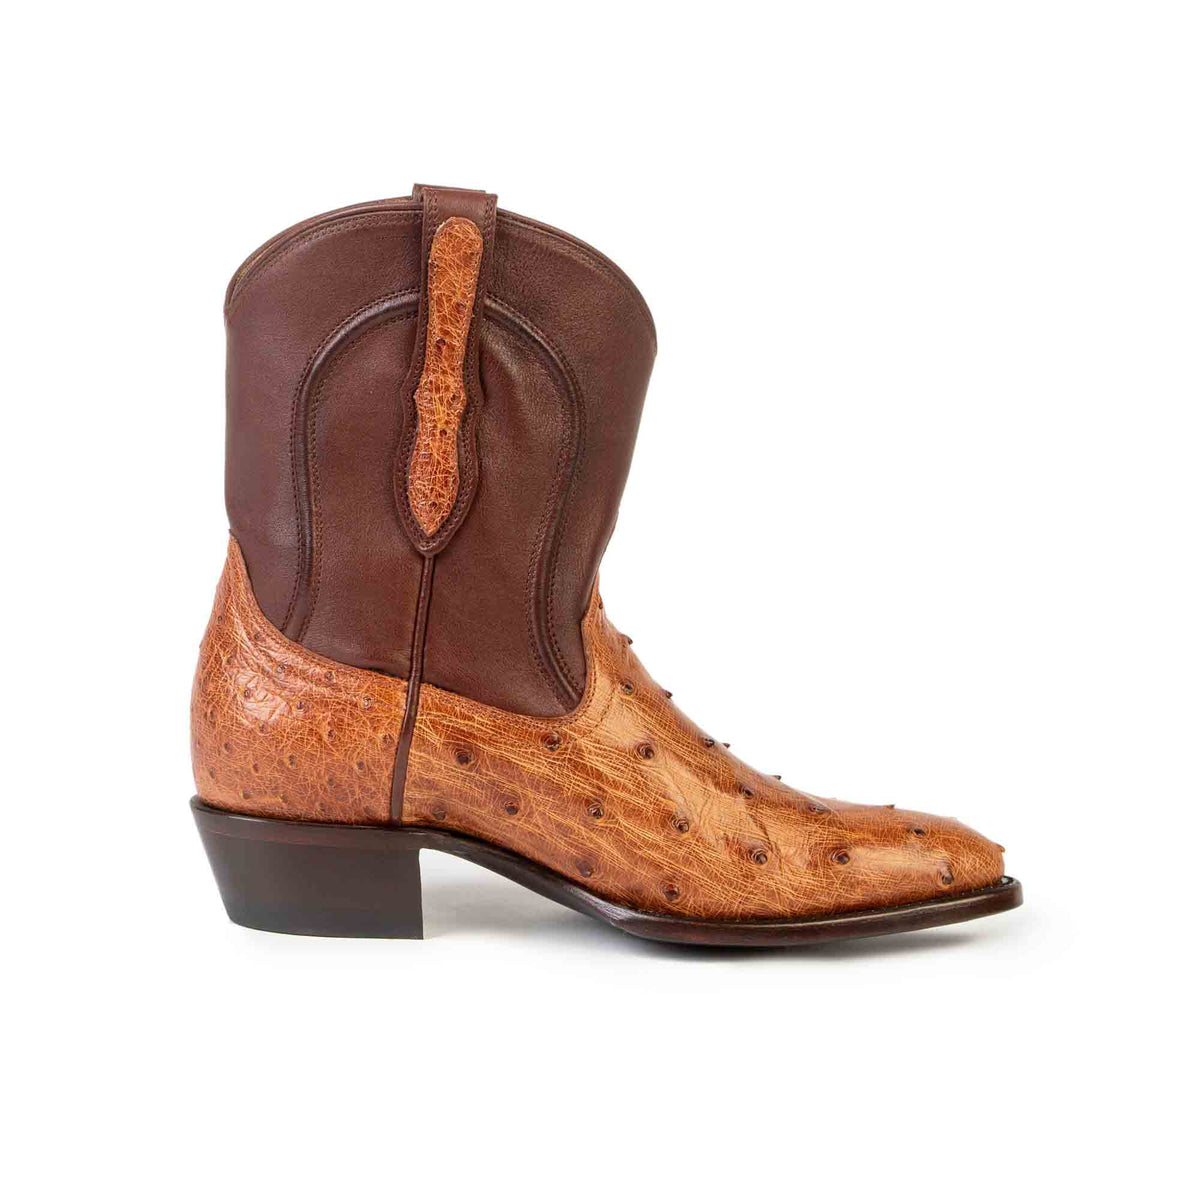 Women's Full-Quill Ostrich Bootie Boot by RUJO